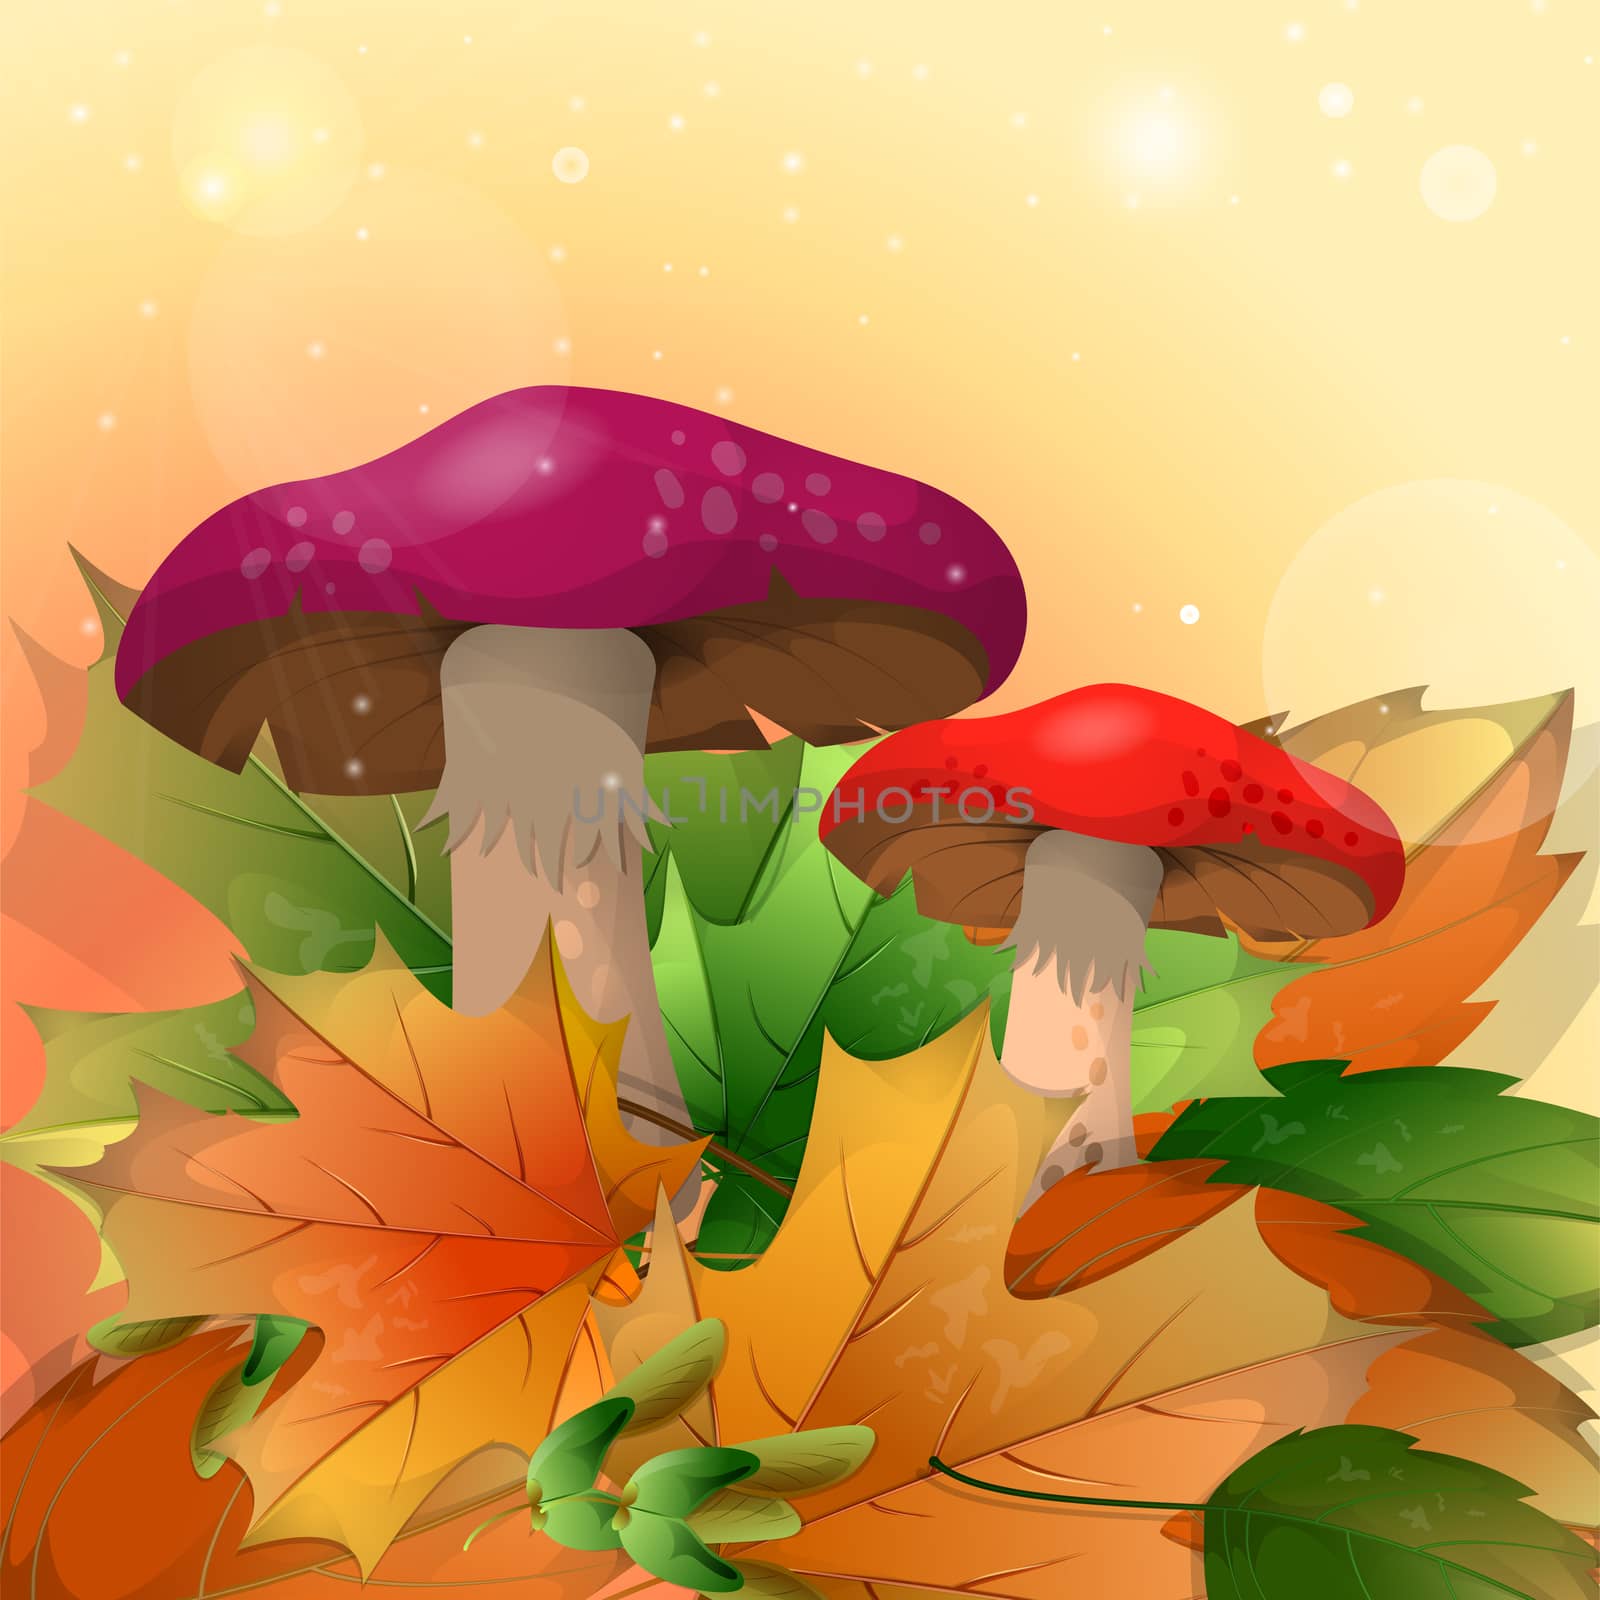 Red mushrooms and autumn leaves on a light background. by Adamchuk